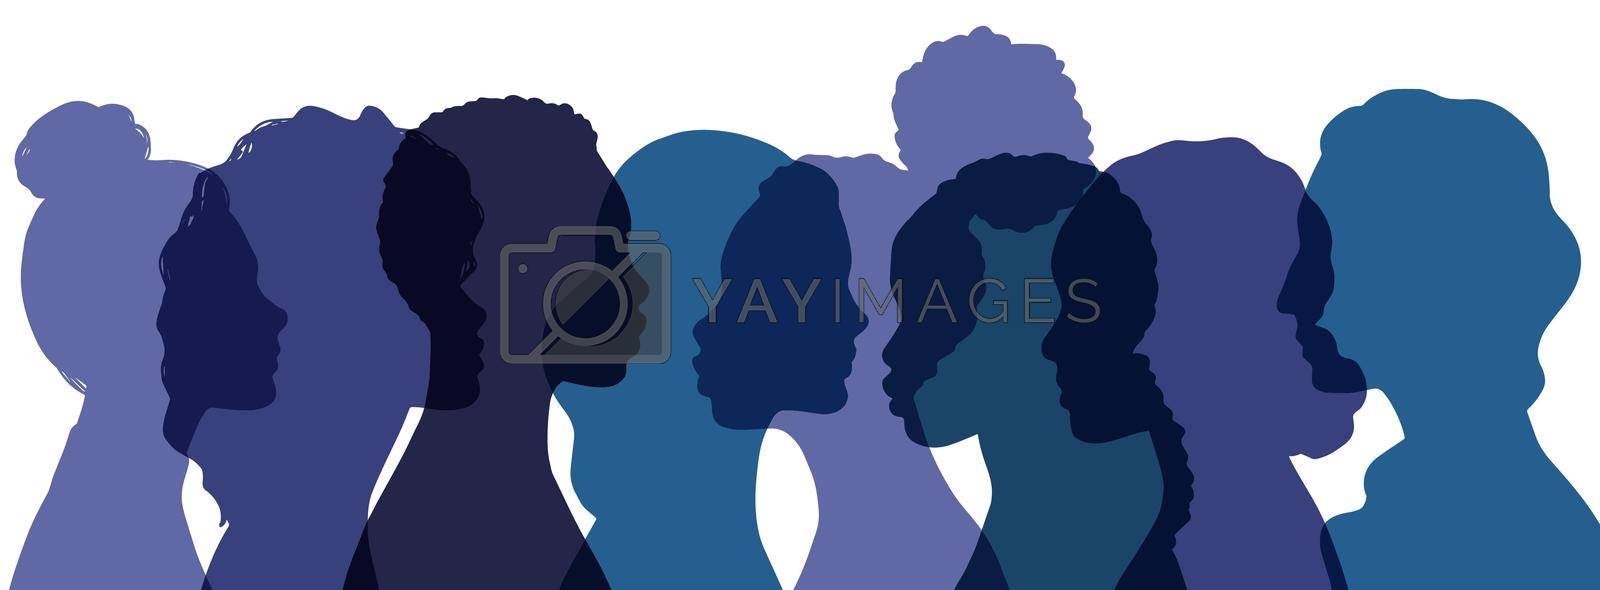 Royalty free image of Diversity multiethnic people. Group of people silhouettes with different culture and racial diversity. Multicultural abstract people background. by iliris